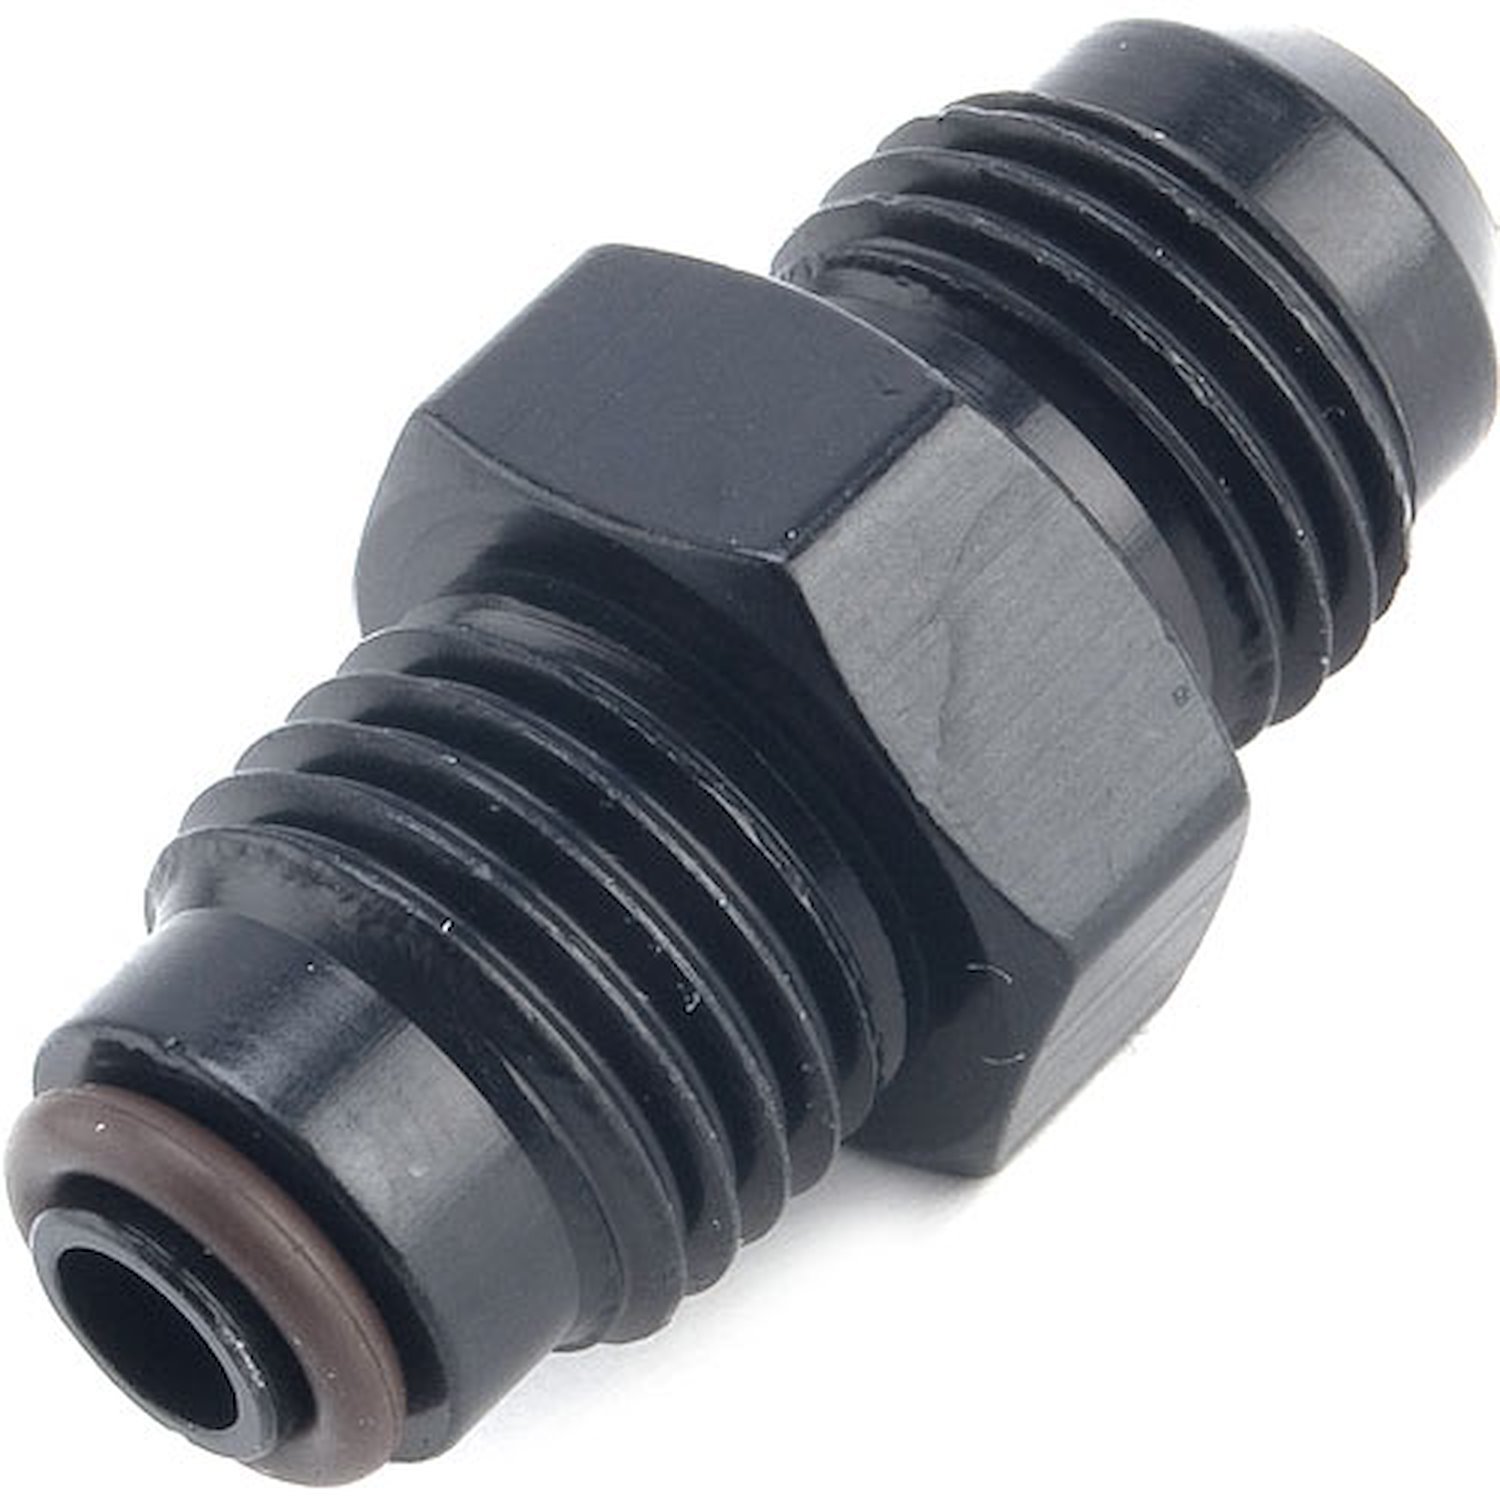 AN to Fuel Injection Adapter Fitting for GM